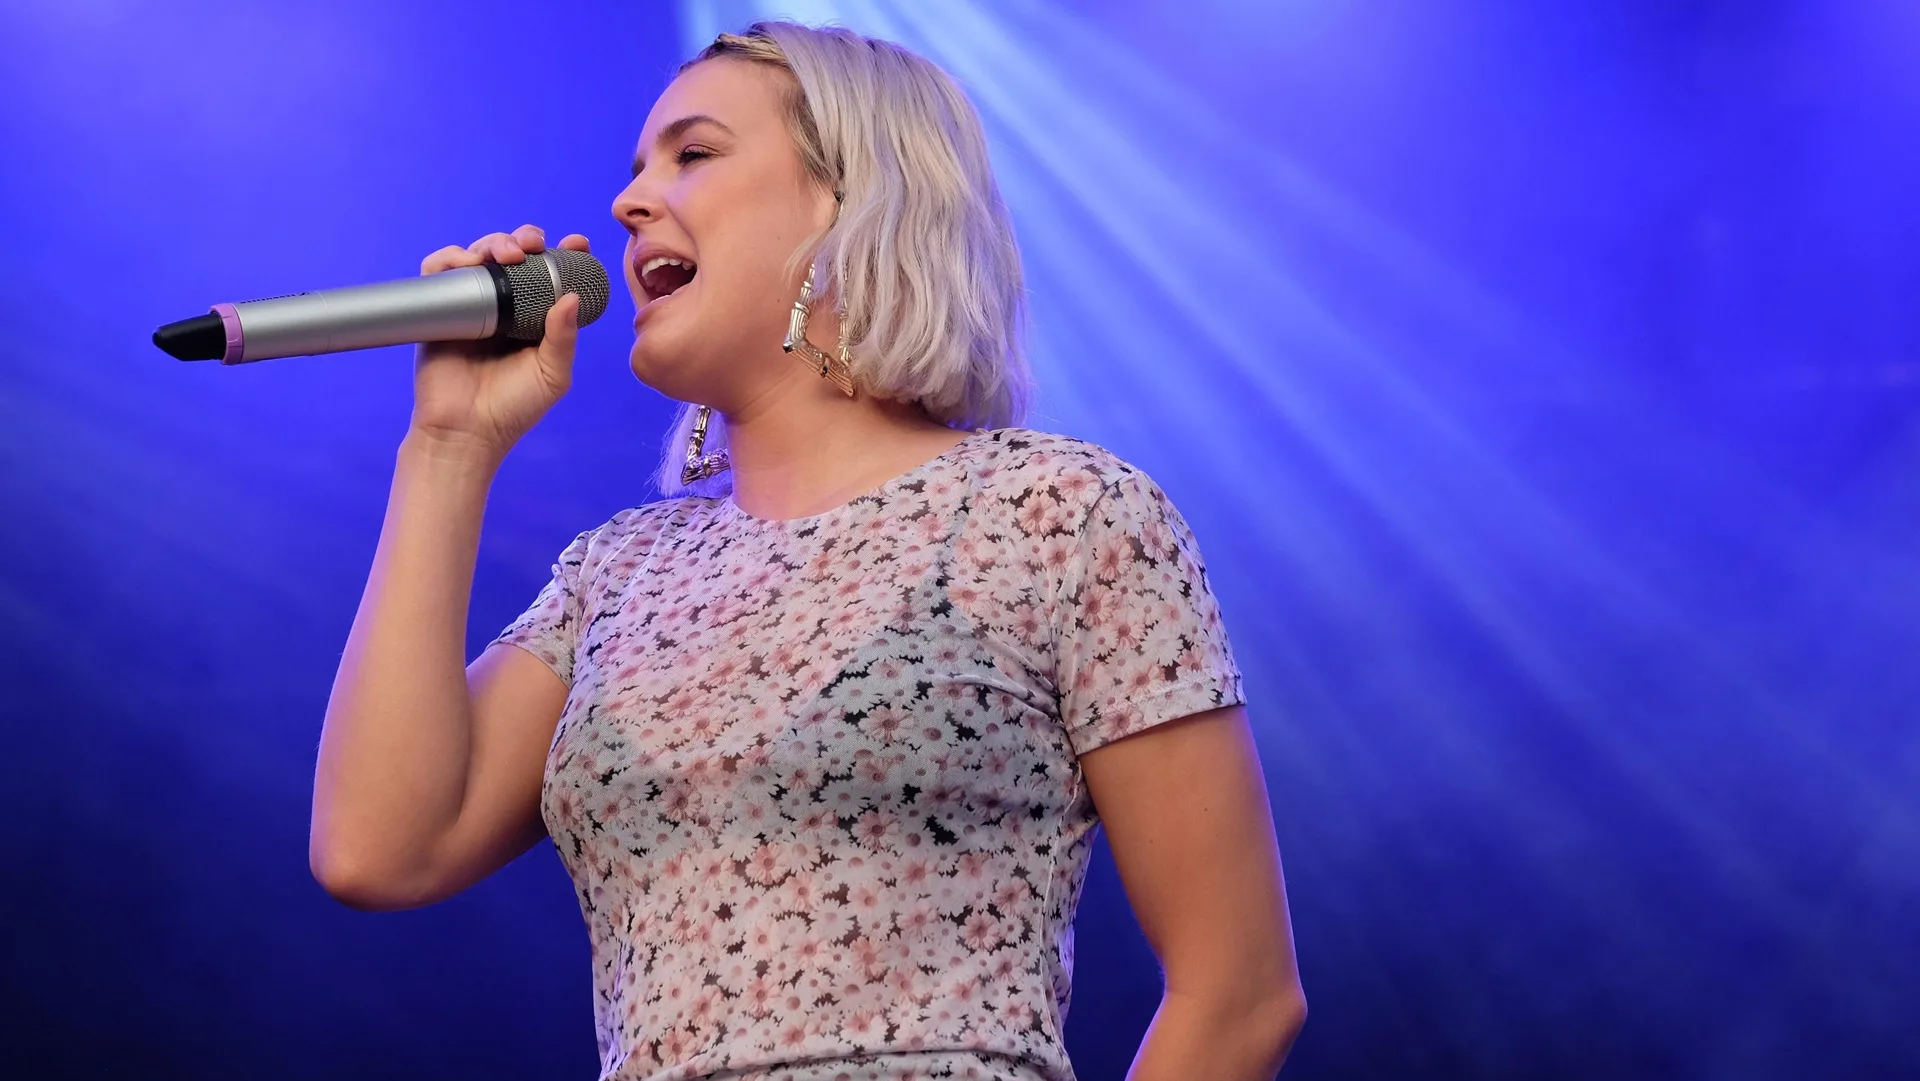 A photograph of the singer Anne-Marie Nicholson performing at Bestival. She is wearing a floral mesh top, singing into a microphone with blonde bobbed hair, against a purple background with a stage light coming down on her.